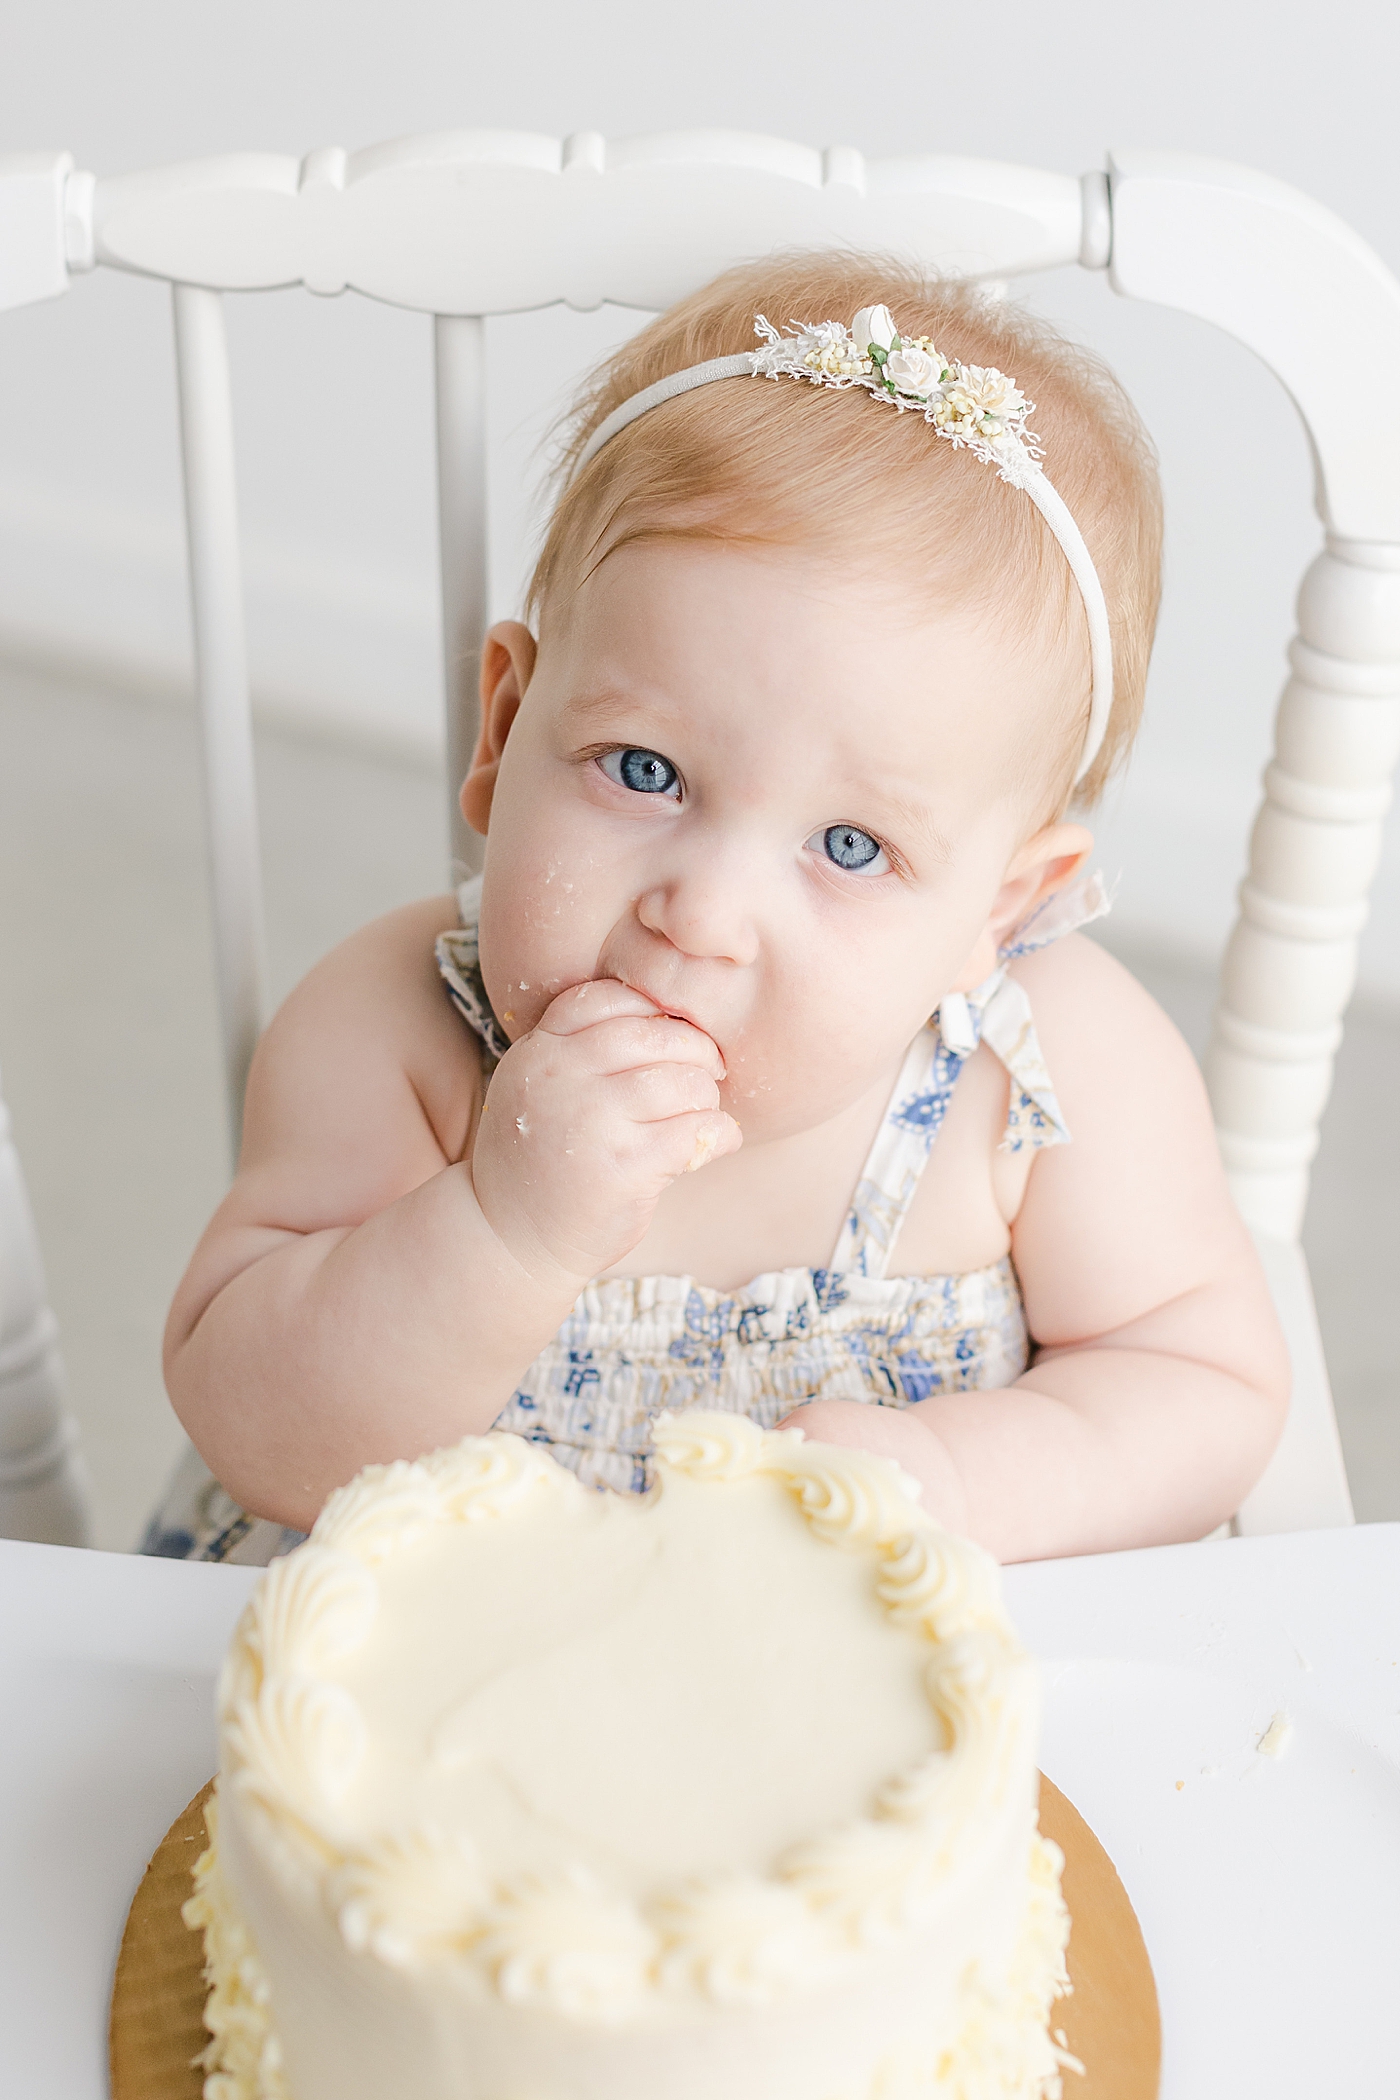 Baby girl with blue eyes eating cake during her one year milestone session | Sana Ahmed Photography